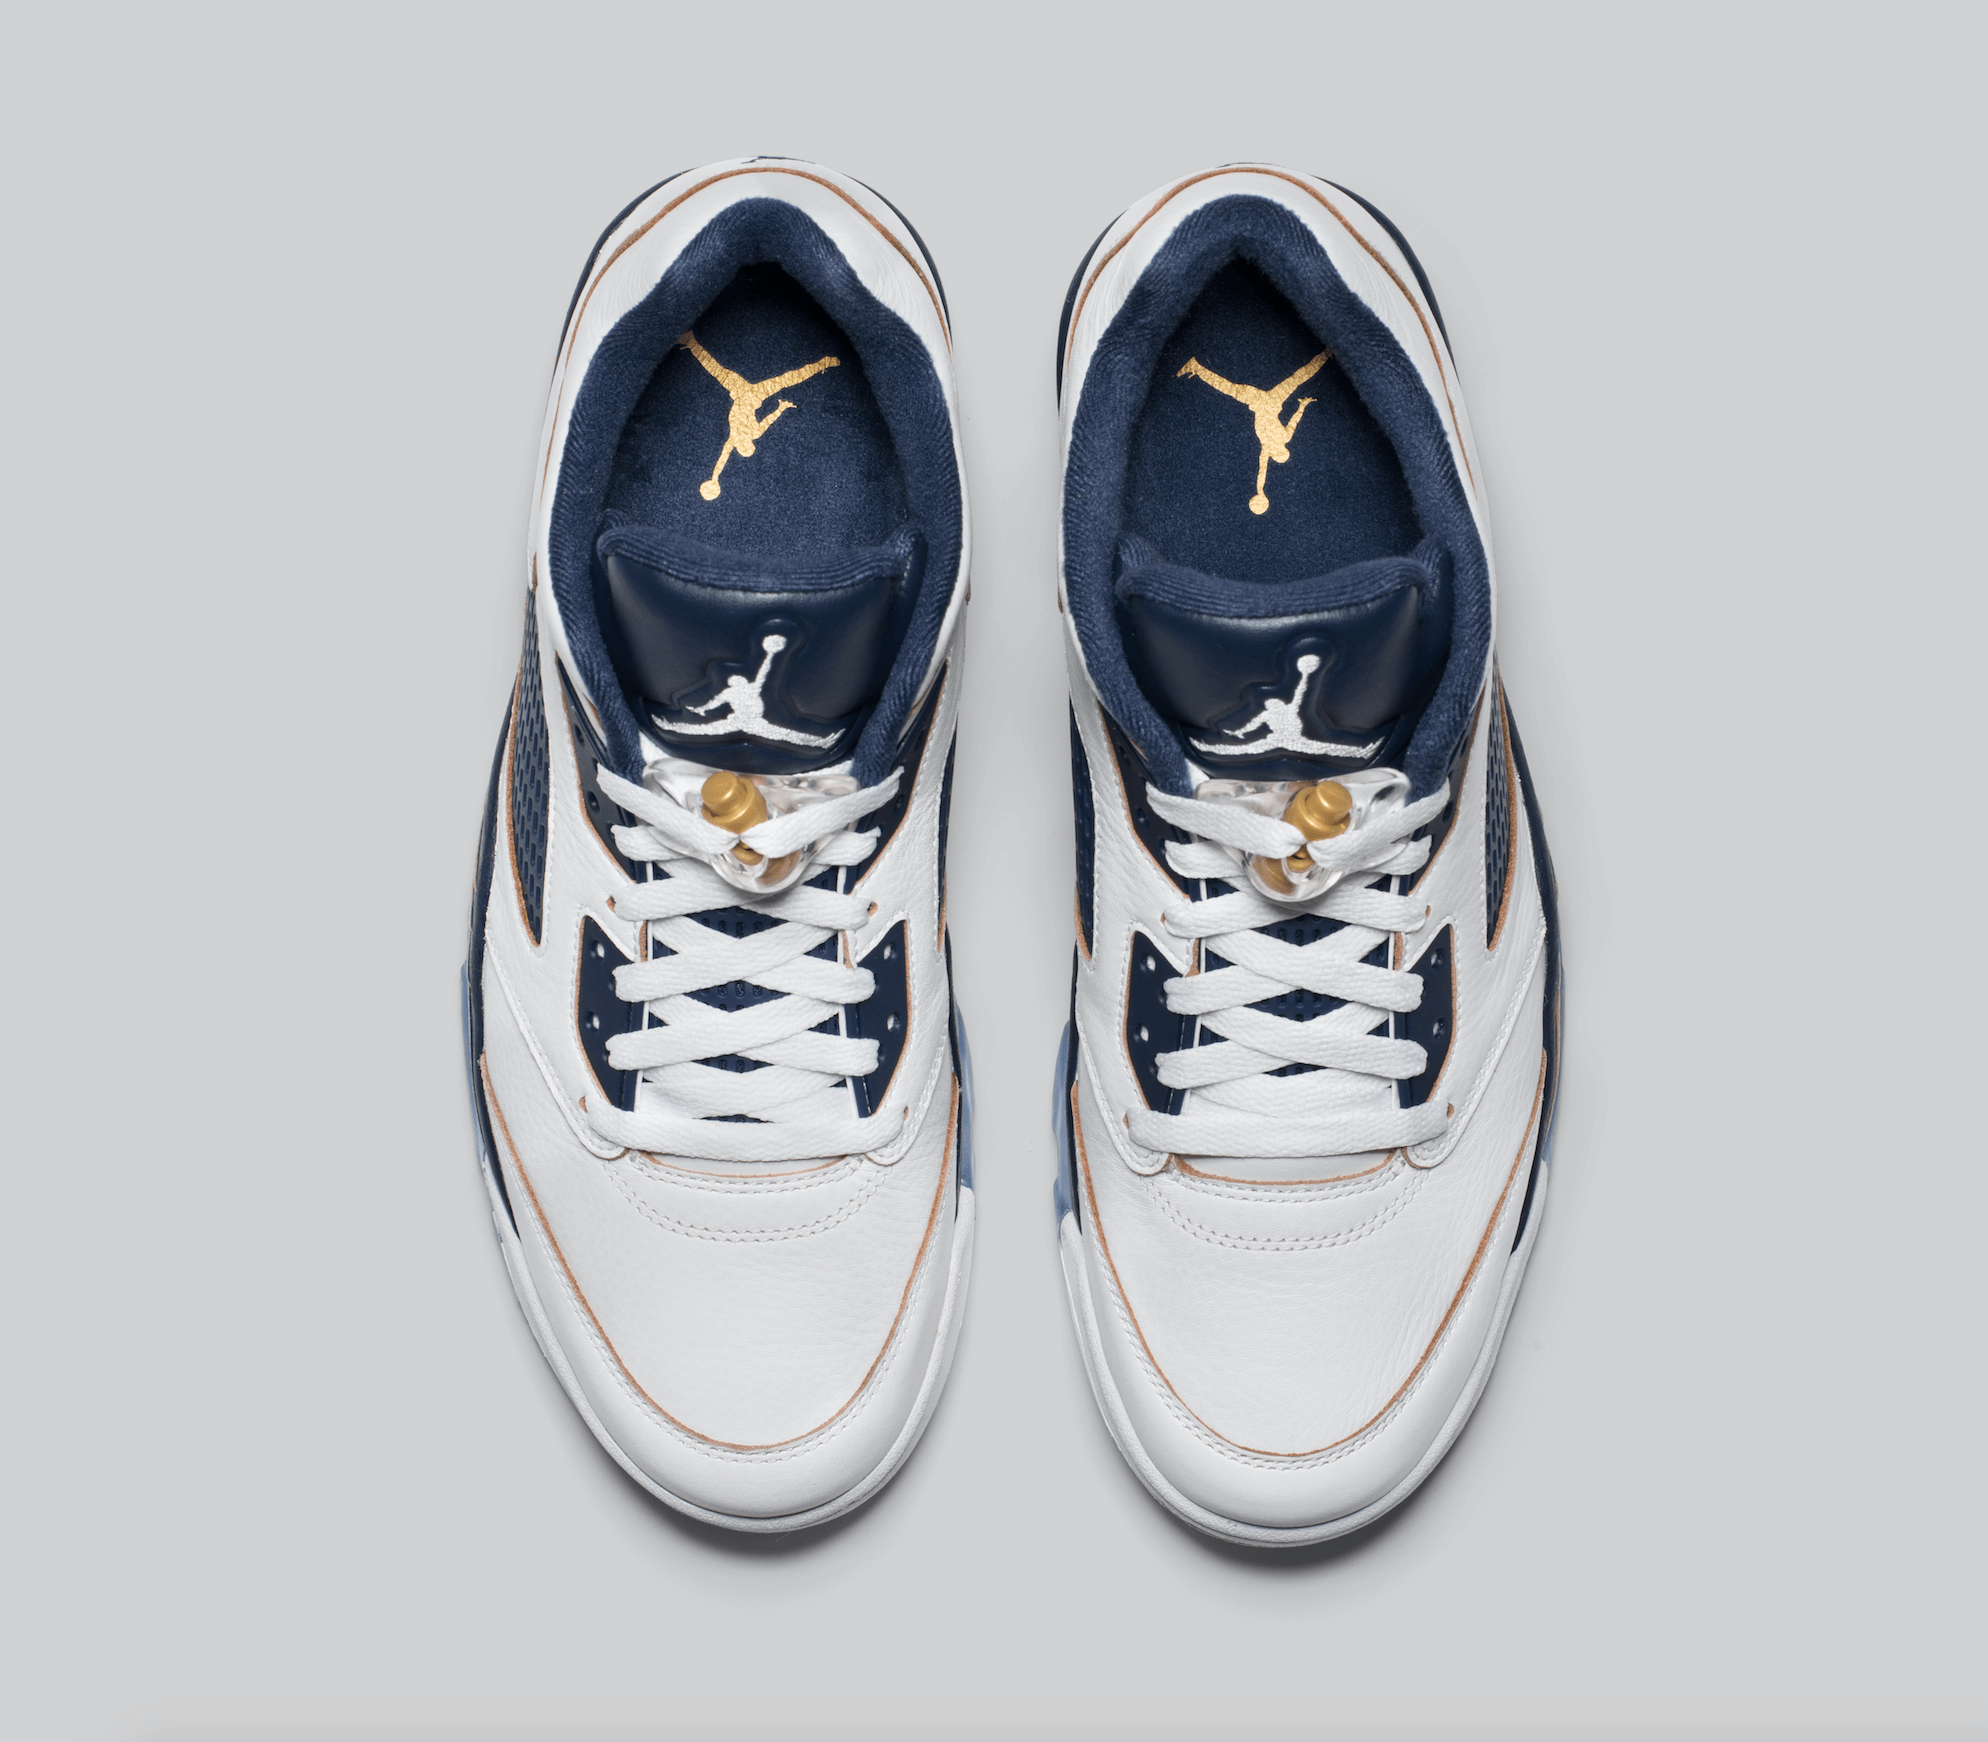 Nike Air Jordan 5 Low Dunk From Above - Where To Buy - 819171-135 | The ...